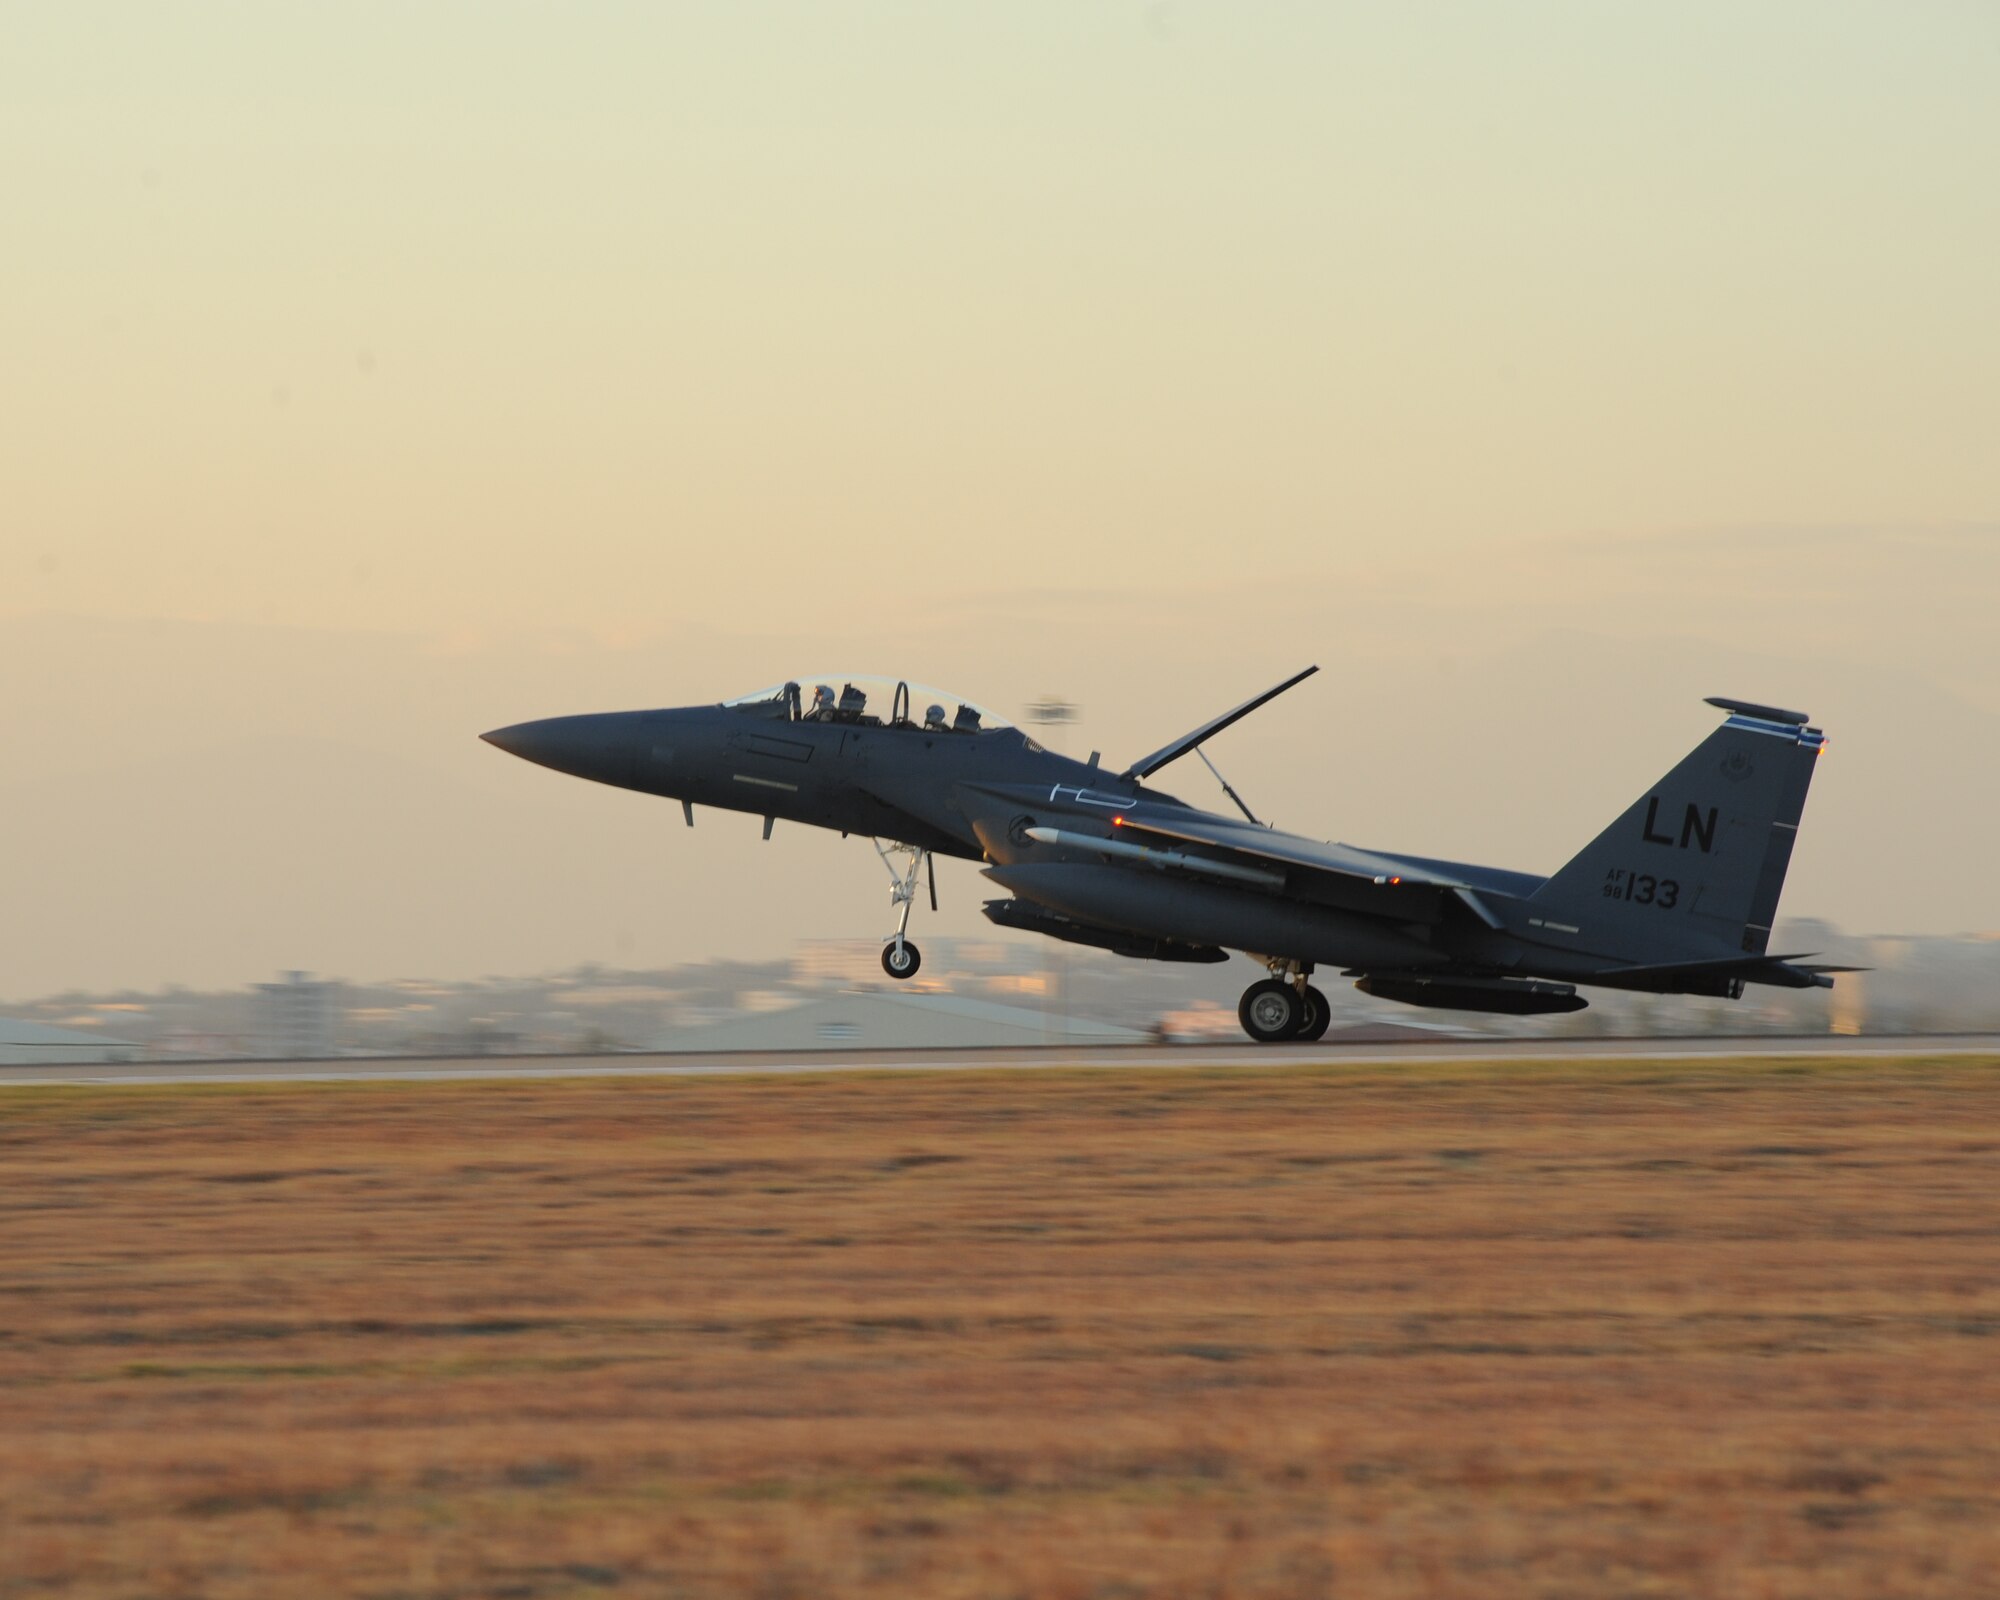 A U.S. Air Force F-15E Strike Eagle lands Nov. 12, 2015, at Incirlik Air Base, Turkey. Six F-15Es deployed to Incirlik AB from the 48th Fighter Wing based at RAF Lakenheath, UK, in support of Operation Inherent Resolve and counter-ISIL missions in Iraq and Syria. The F-15E Strike Eagle is designed to perform air-to-air and air-to-ground missions, and specializes in gaining and maintaining air superiority. (U.S. Air Force photo by Airman 1st Class Daniel Lile/Released)